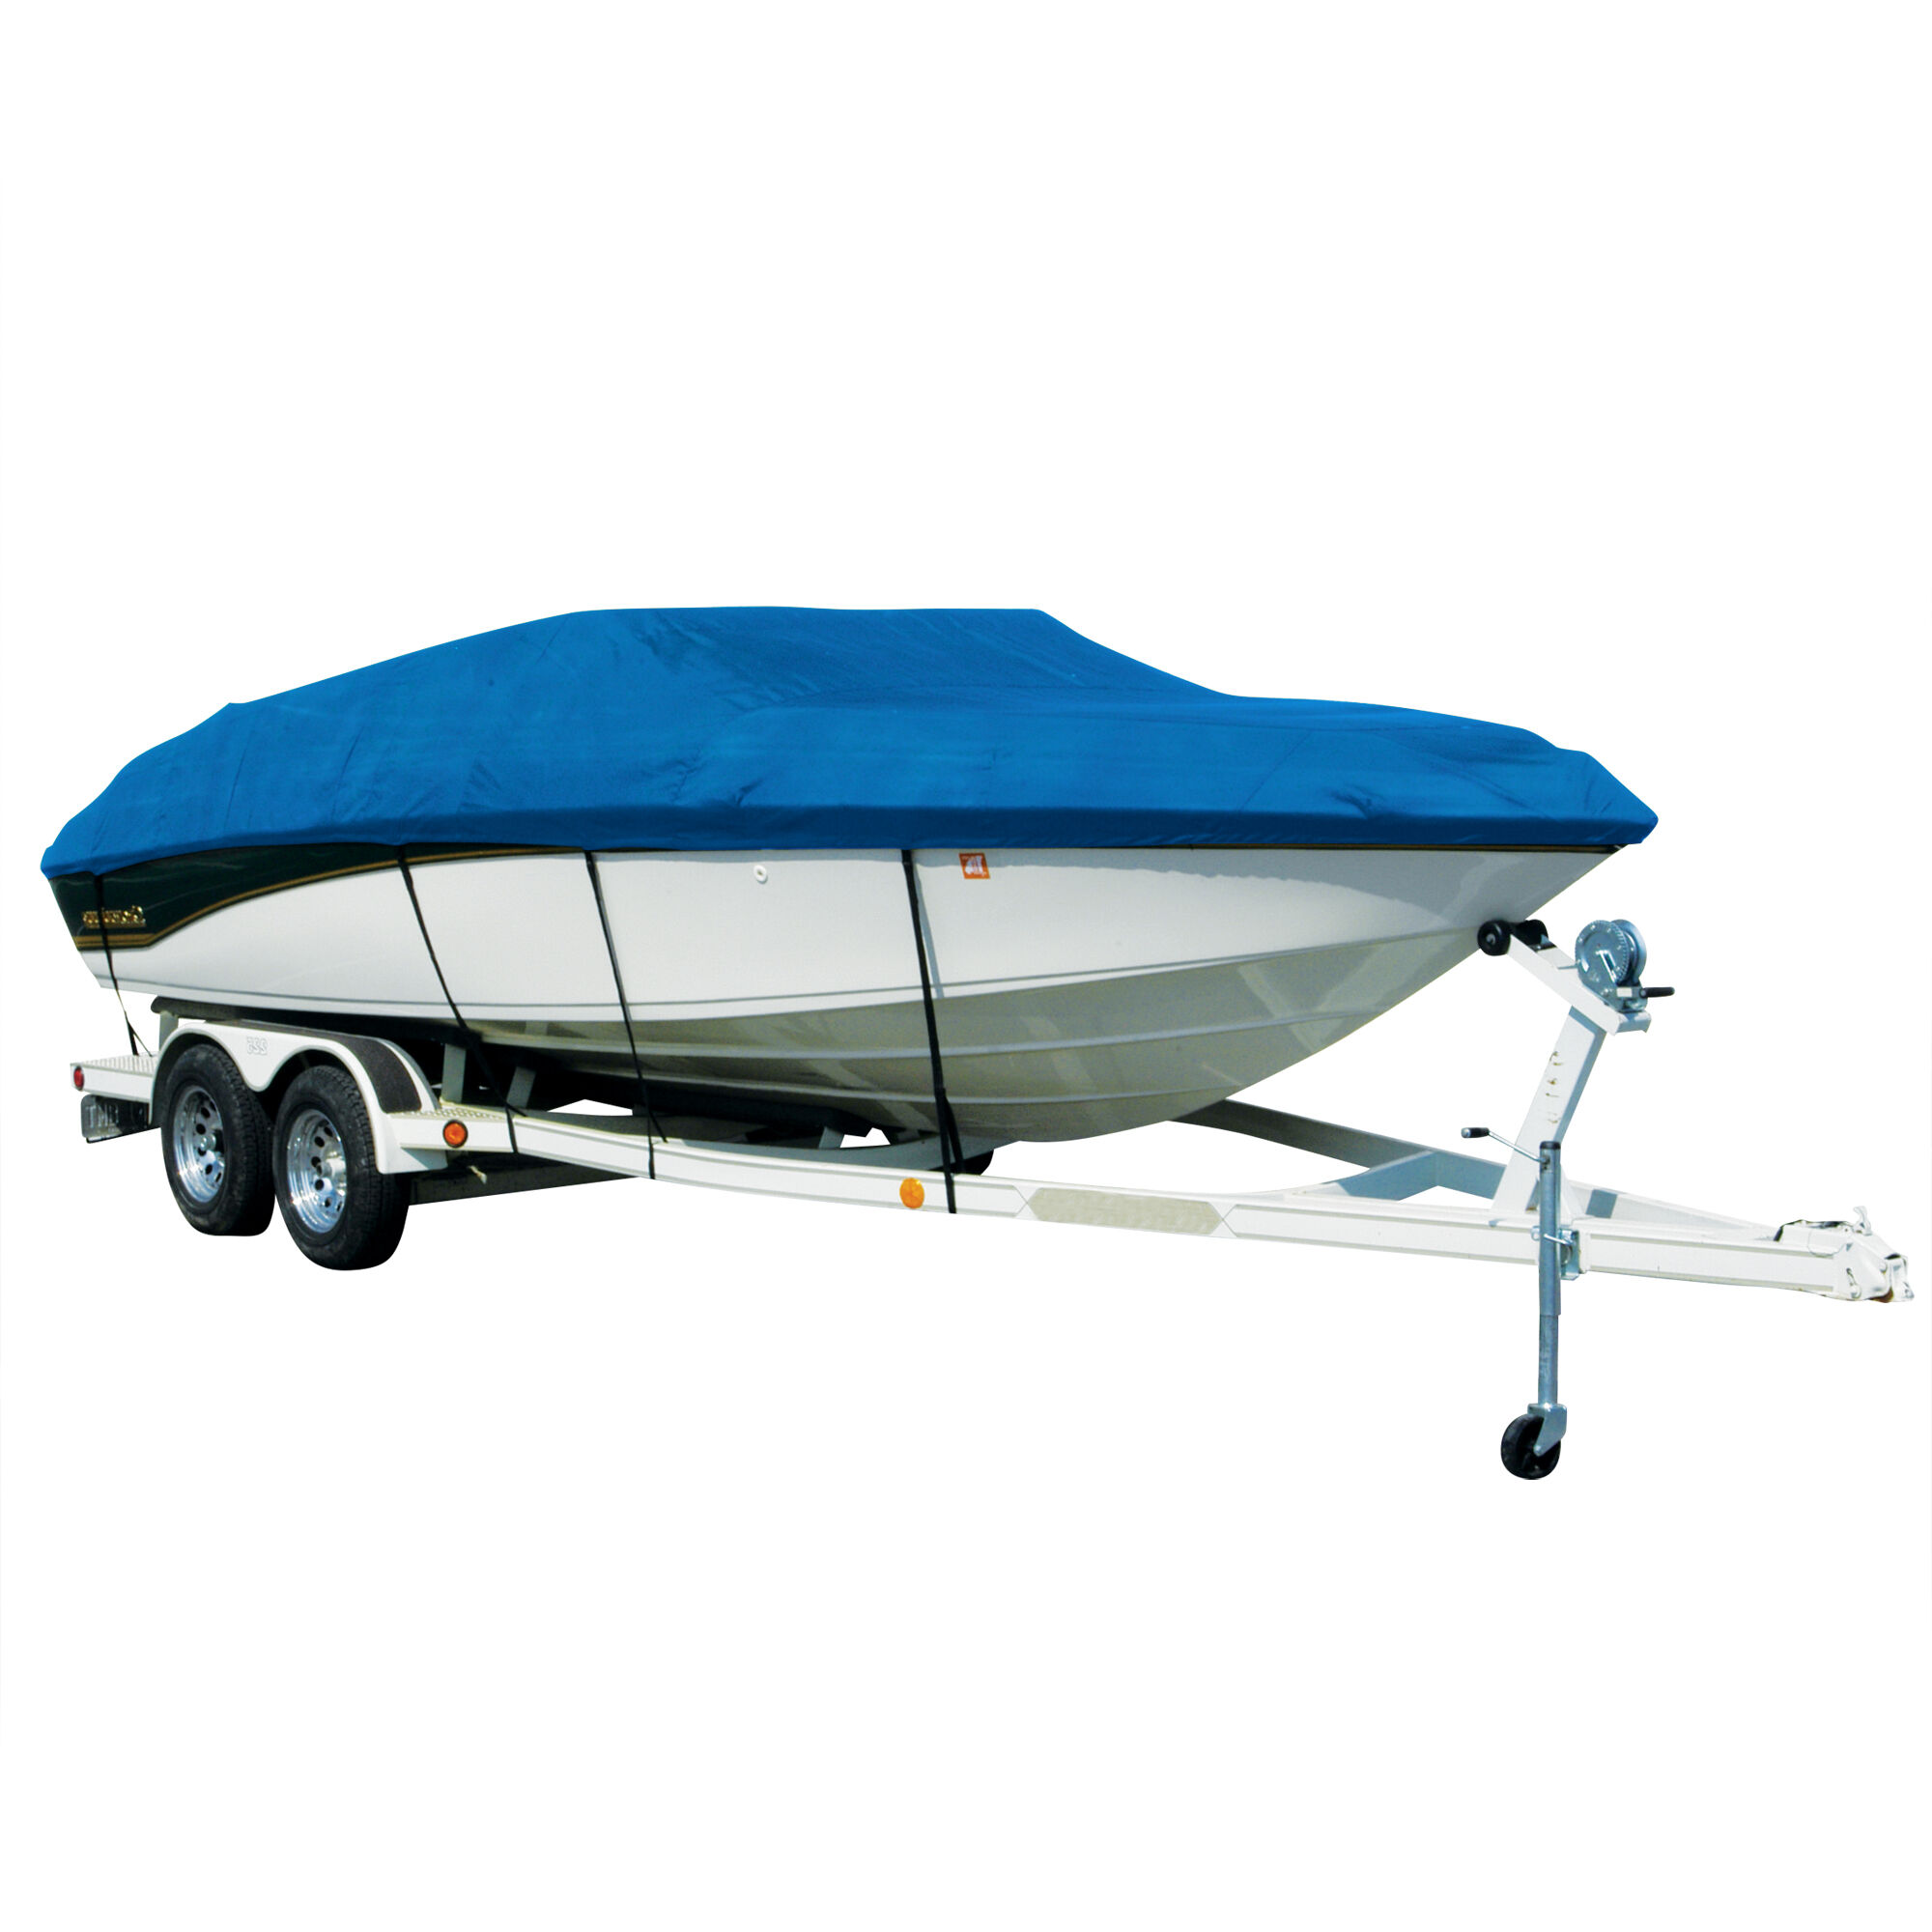 Covermate Sharkskin Plus Exact-Fit Cover for Baja 33 Outlaw 33 Outlaw Does Not Cover PLATFORMm I/O. Blue